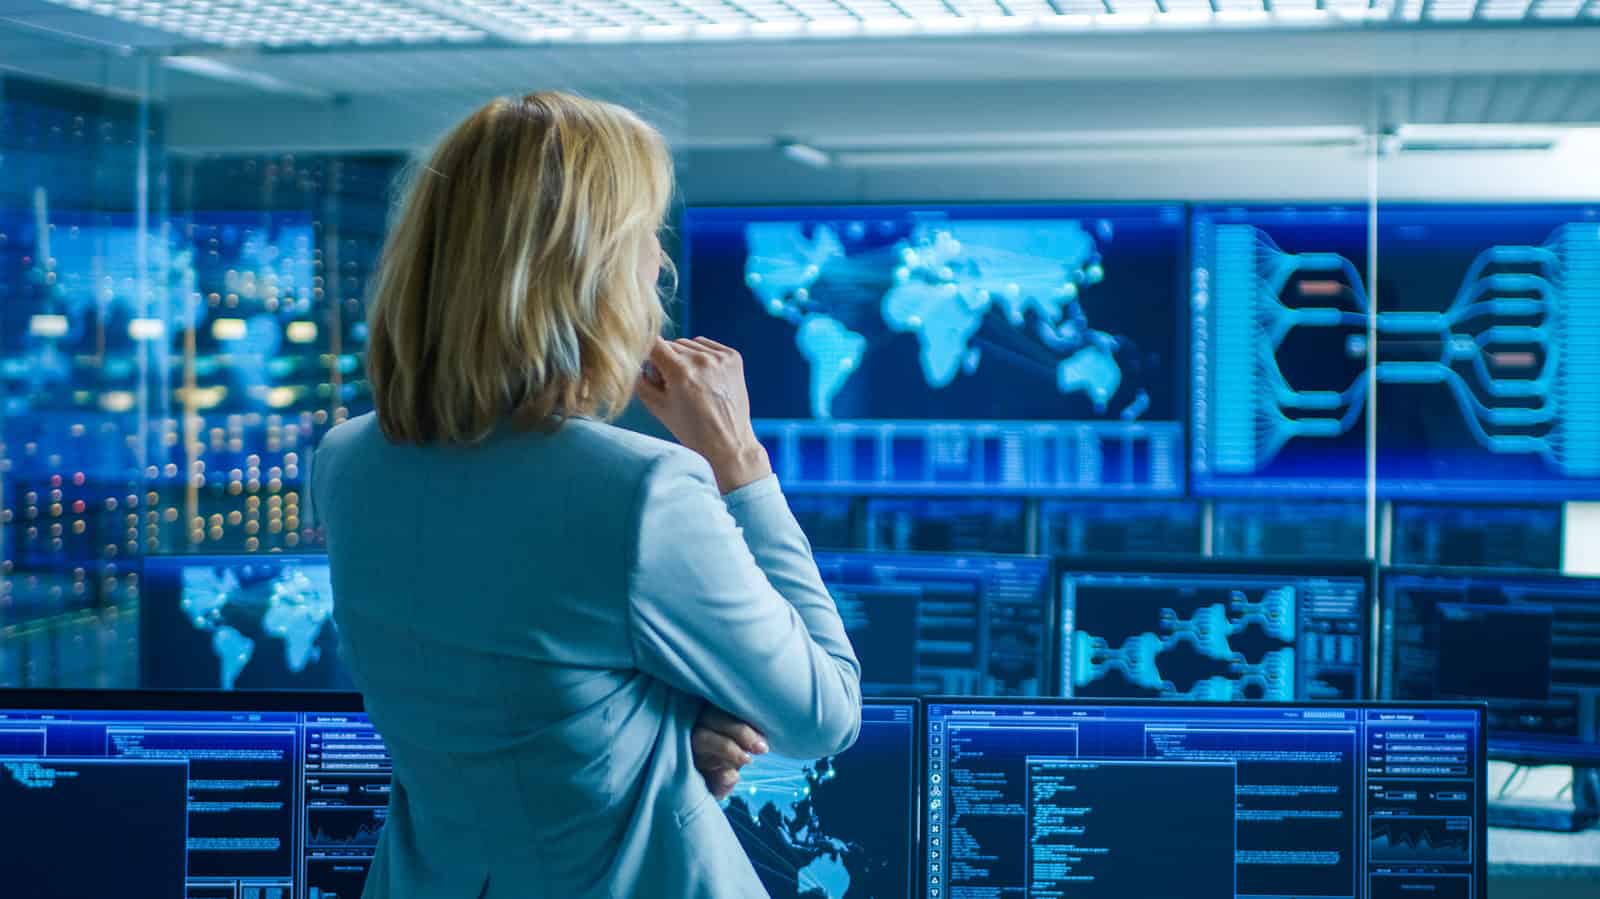 woman standing in a security control room looking at screens with data